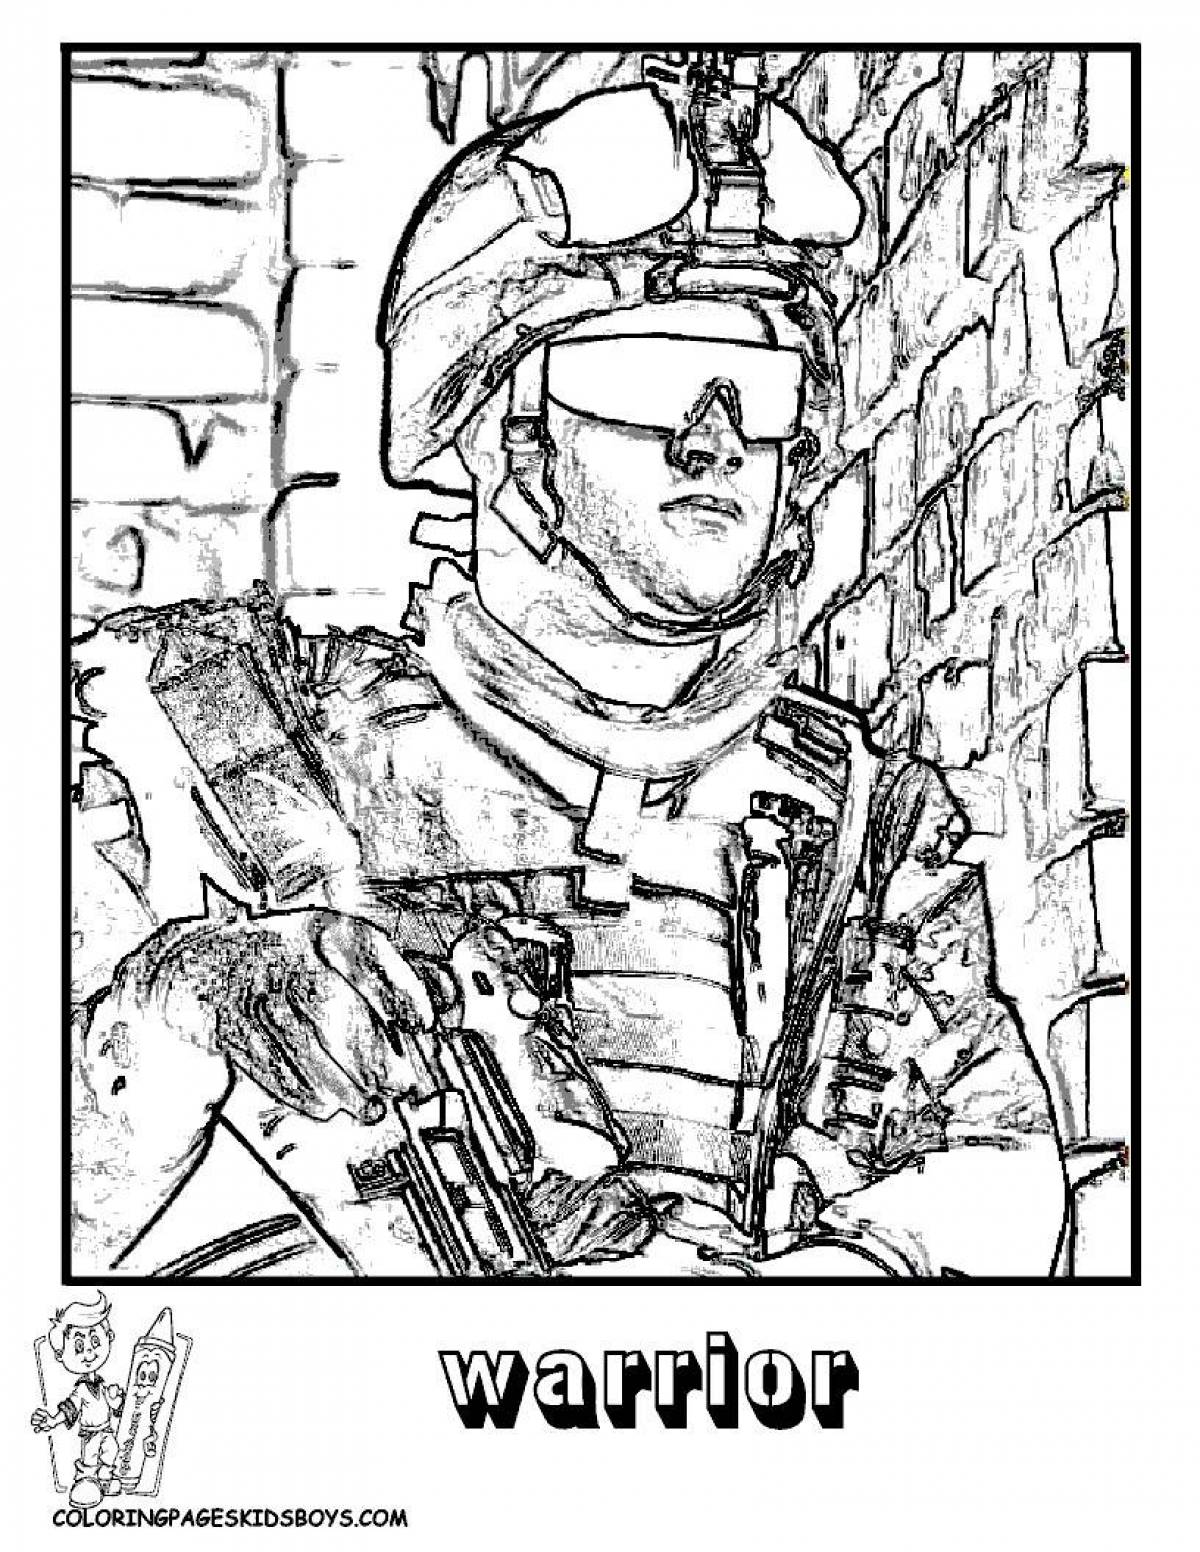 Coloring page of the relentless special forces